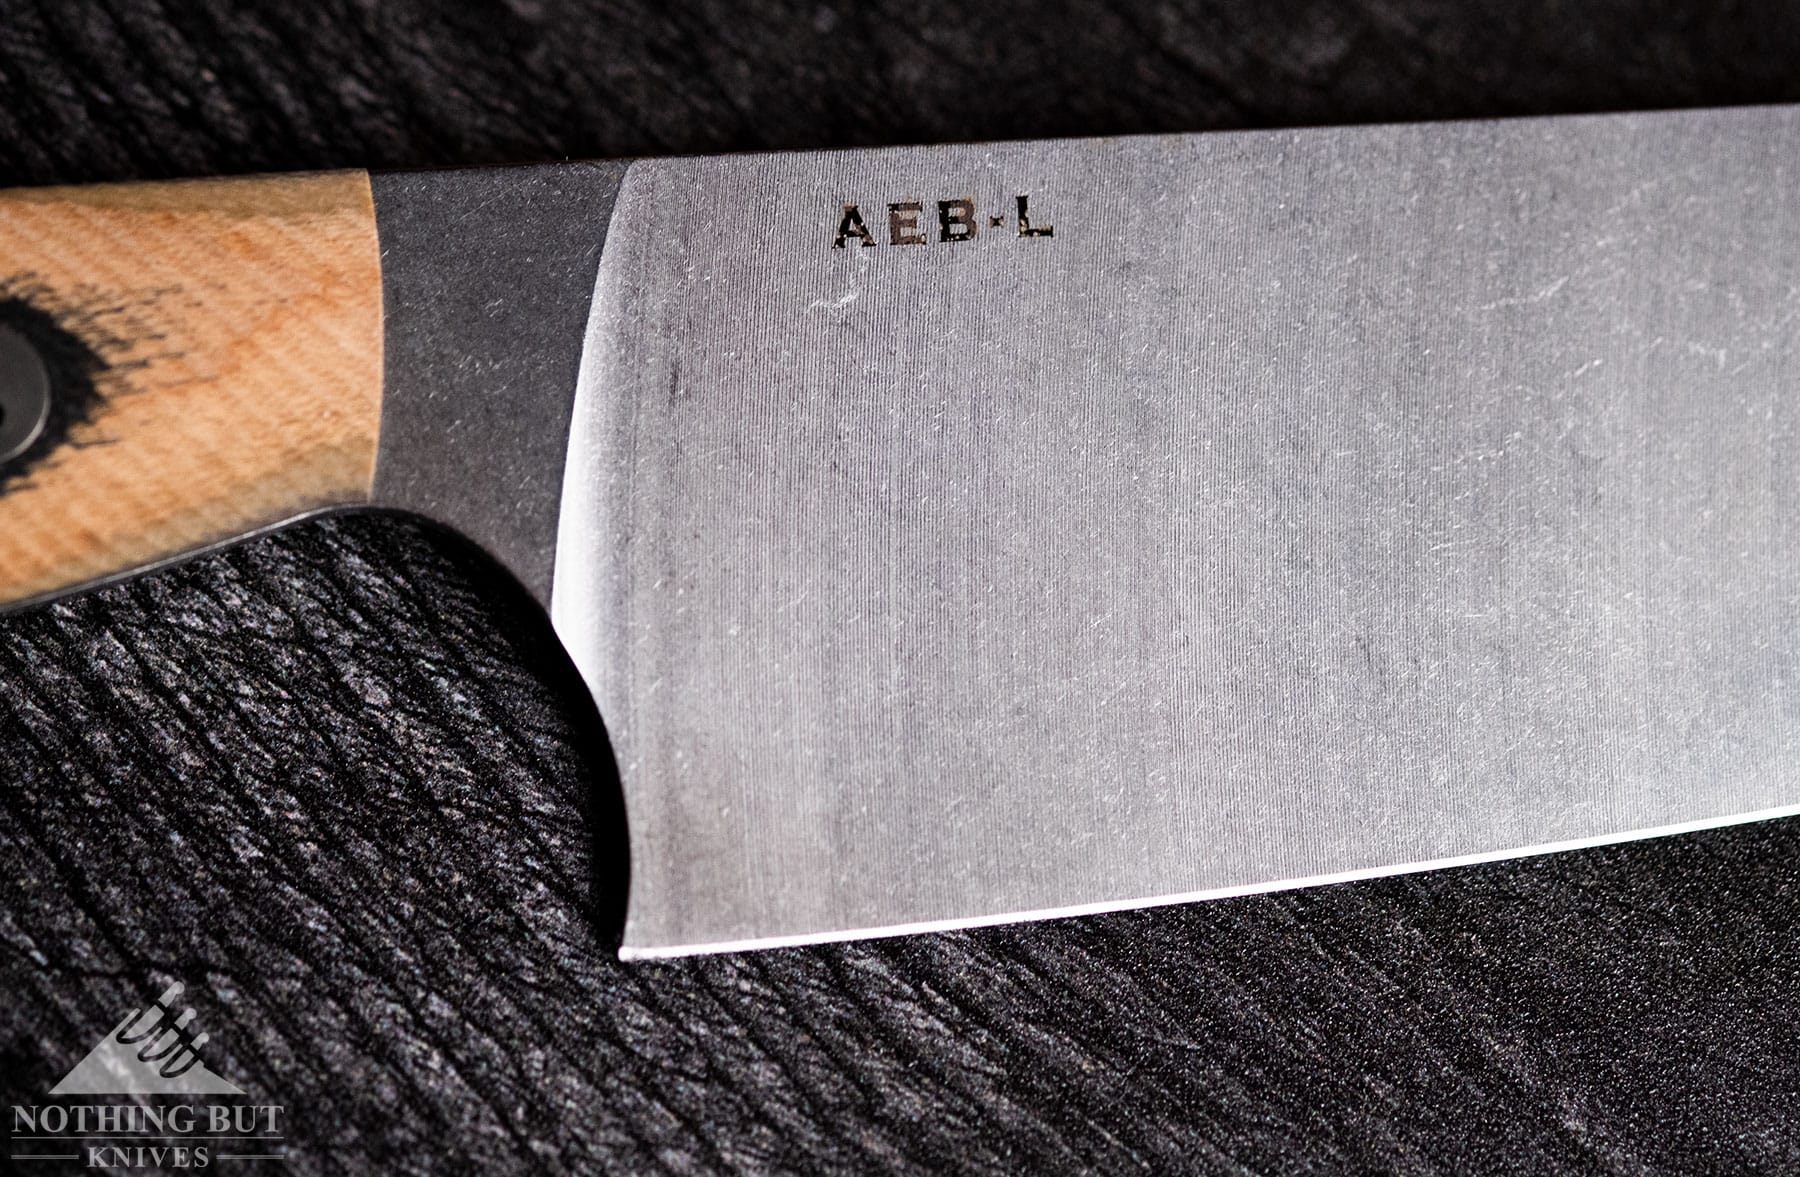 The Bradford Guardian 8 inch chef knife features German AEB-L steel.